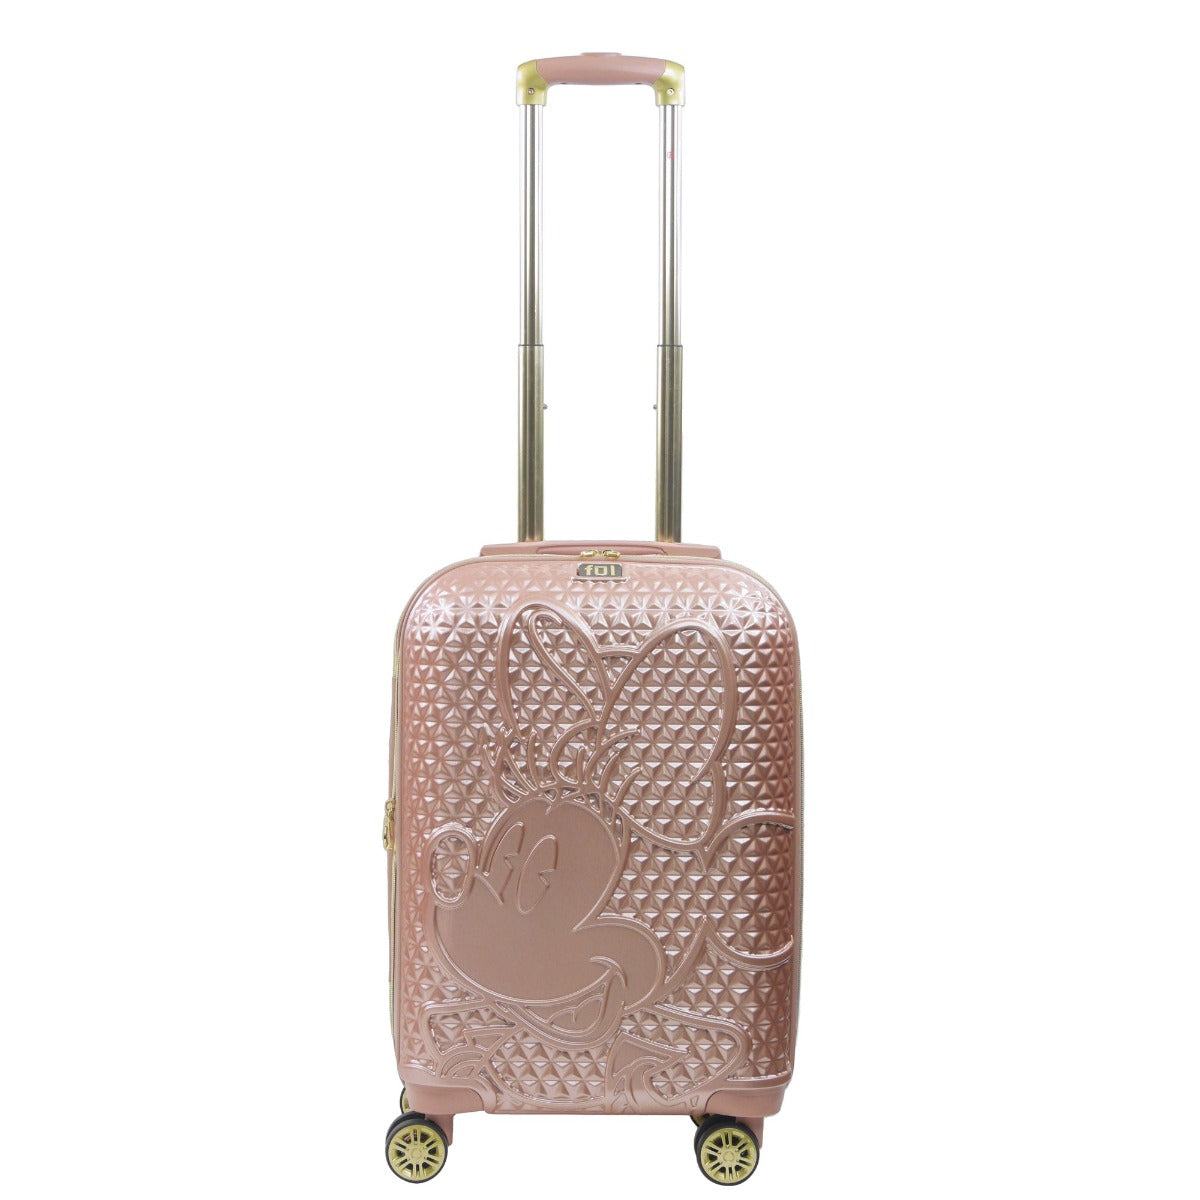 Rose gold Ful Disney Minnie Mouse textured 22.5" hardside spinner luggage with 2 id tags - best carry-on suitcase